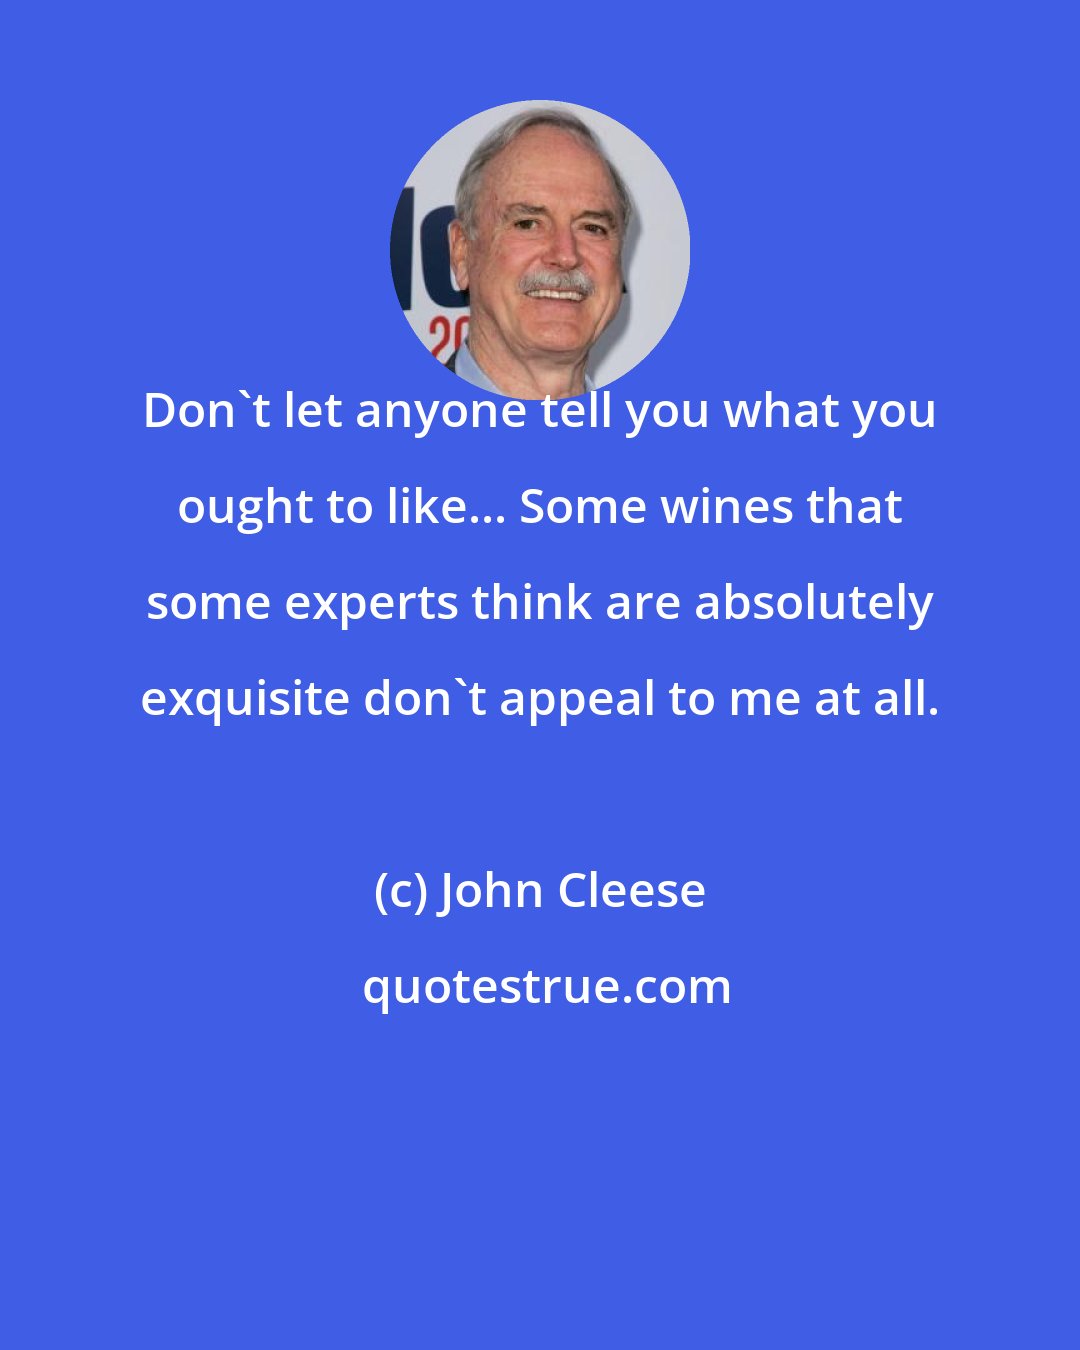 John Cleese: Don't let anyone tell you what you ought to like... Some wines that some experts think are absolutely exquisite don't appeal to me at all.